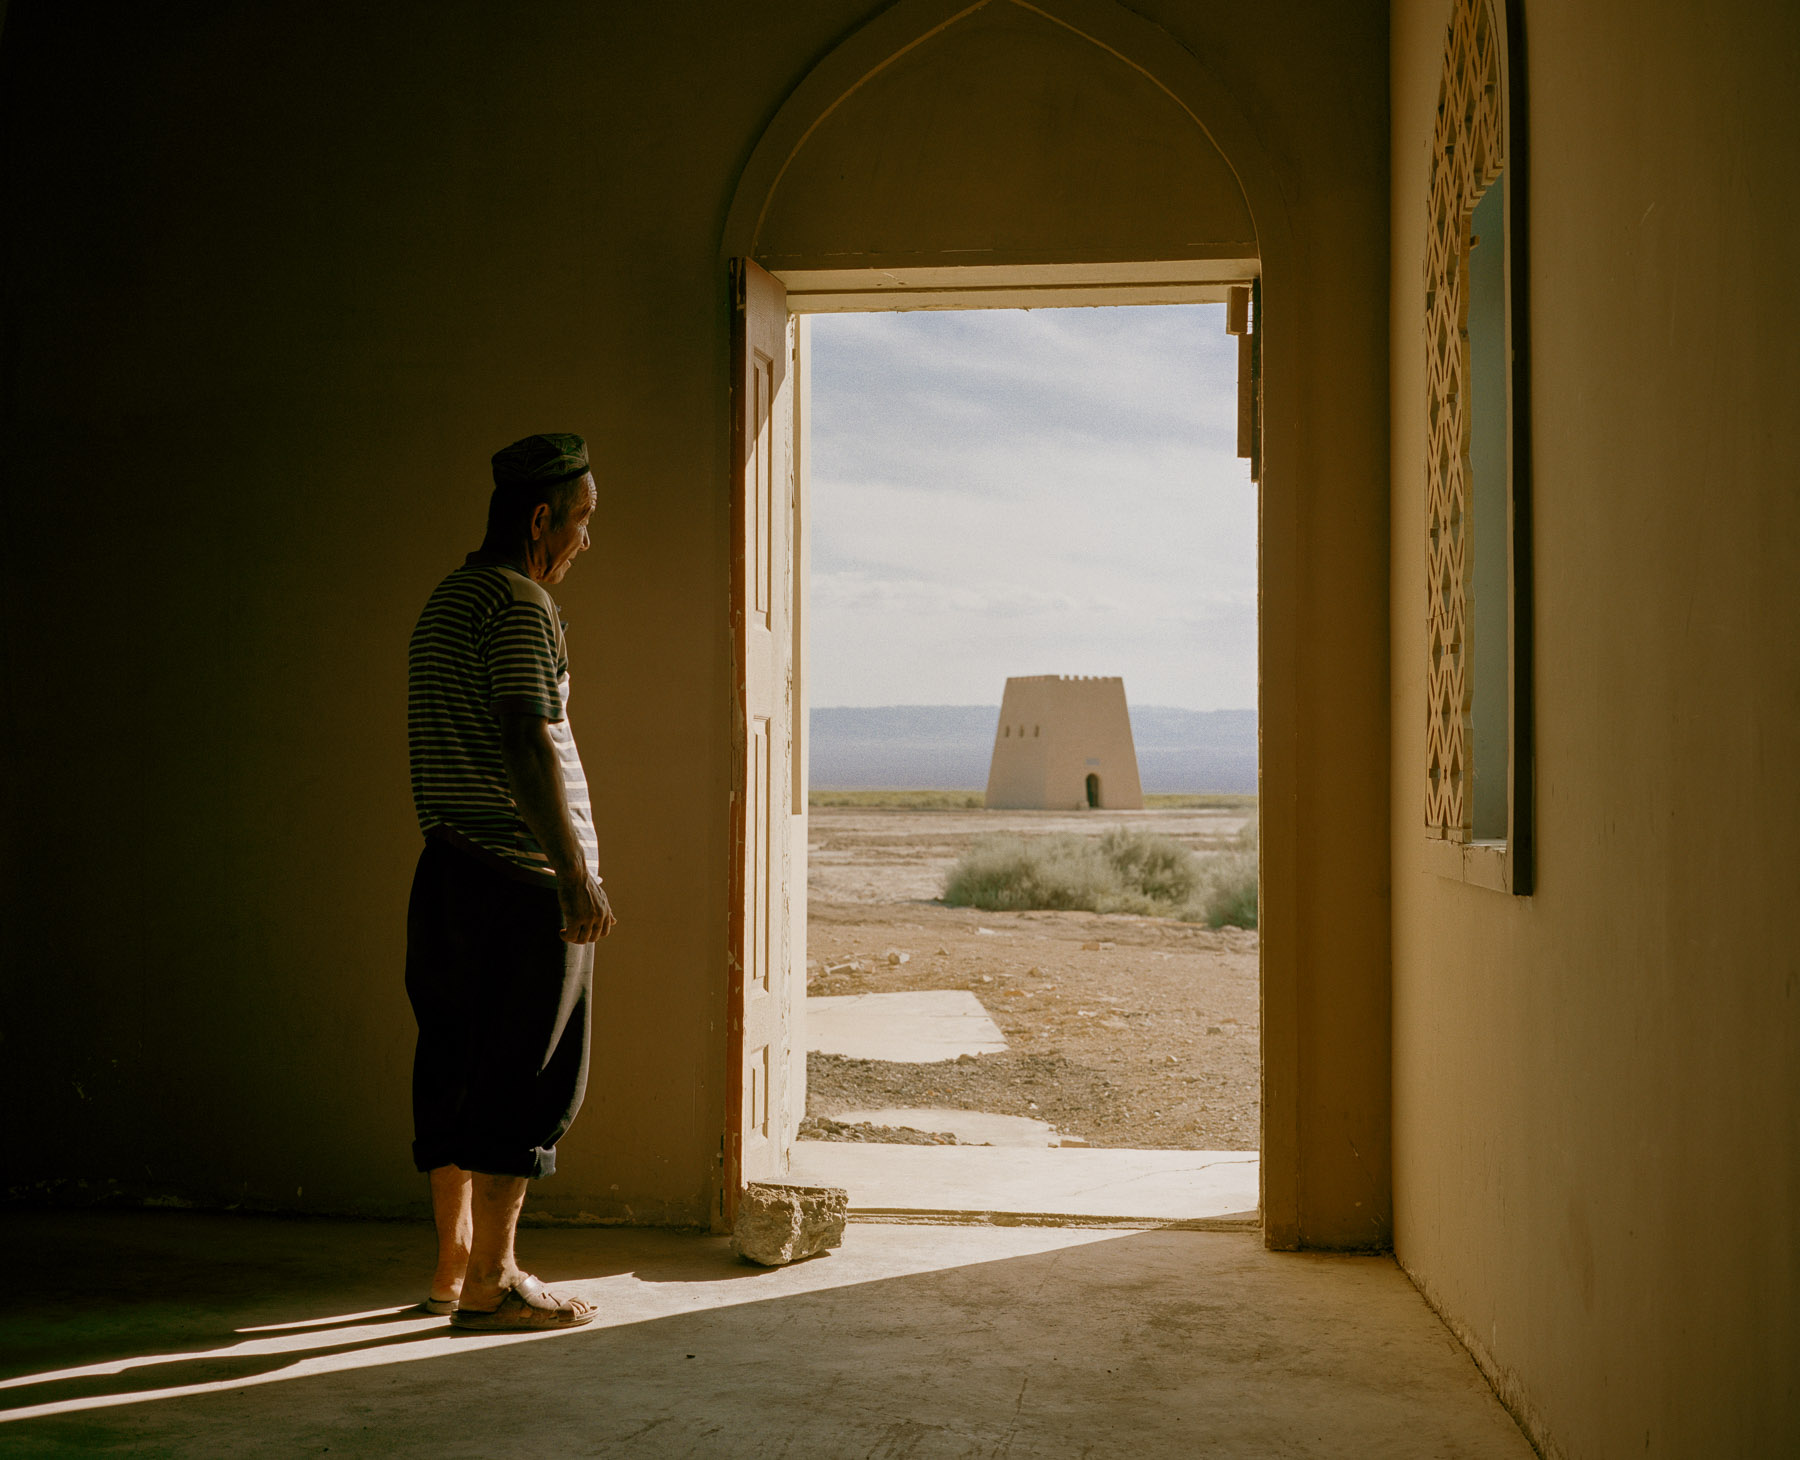  June 2016. Xinjiang province, China. Uighur man looking through the door of his house into the Turpan depression and Ayding lake. Ayding lake is a dried up lake in the Turpan Depression, Xinjiang Uyghur Autonomous Region.. At 154 m below sea level, 